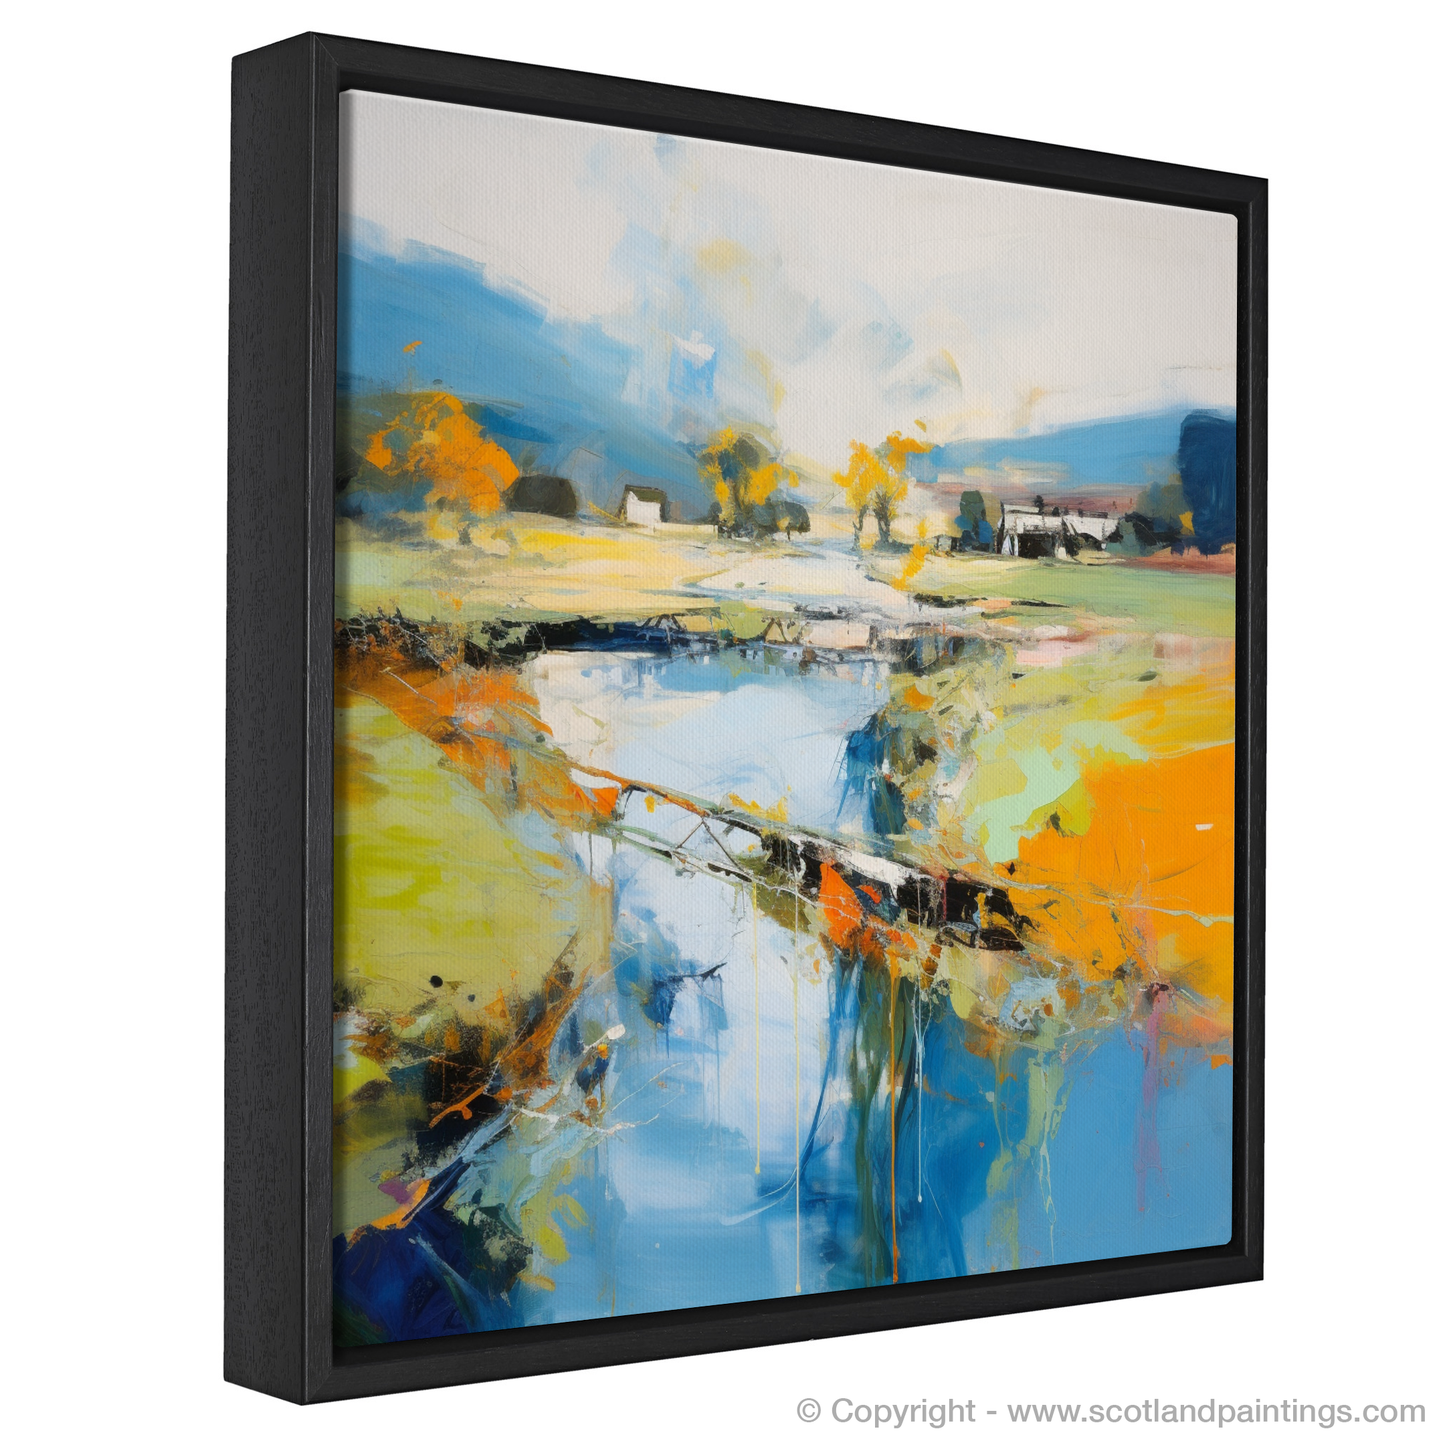 Painting and Art Print of River Almond, Edinburgh in summer entitled "Summer Serenity by the River Almond".